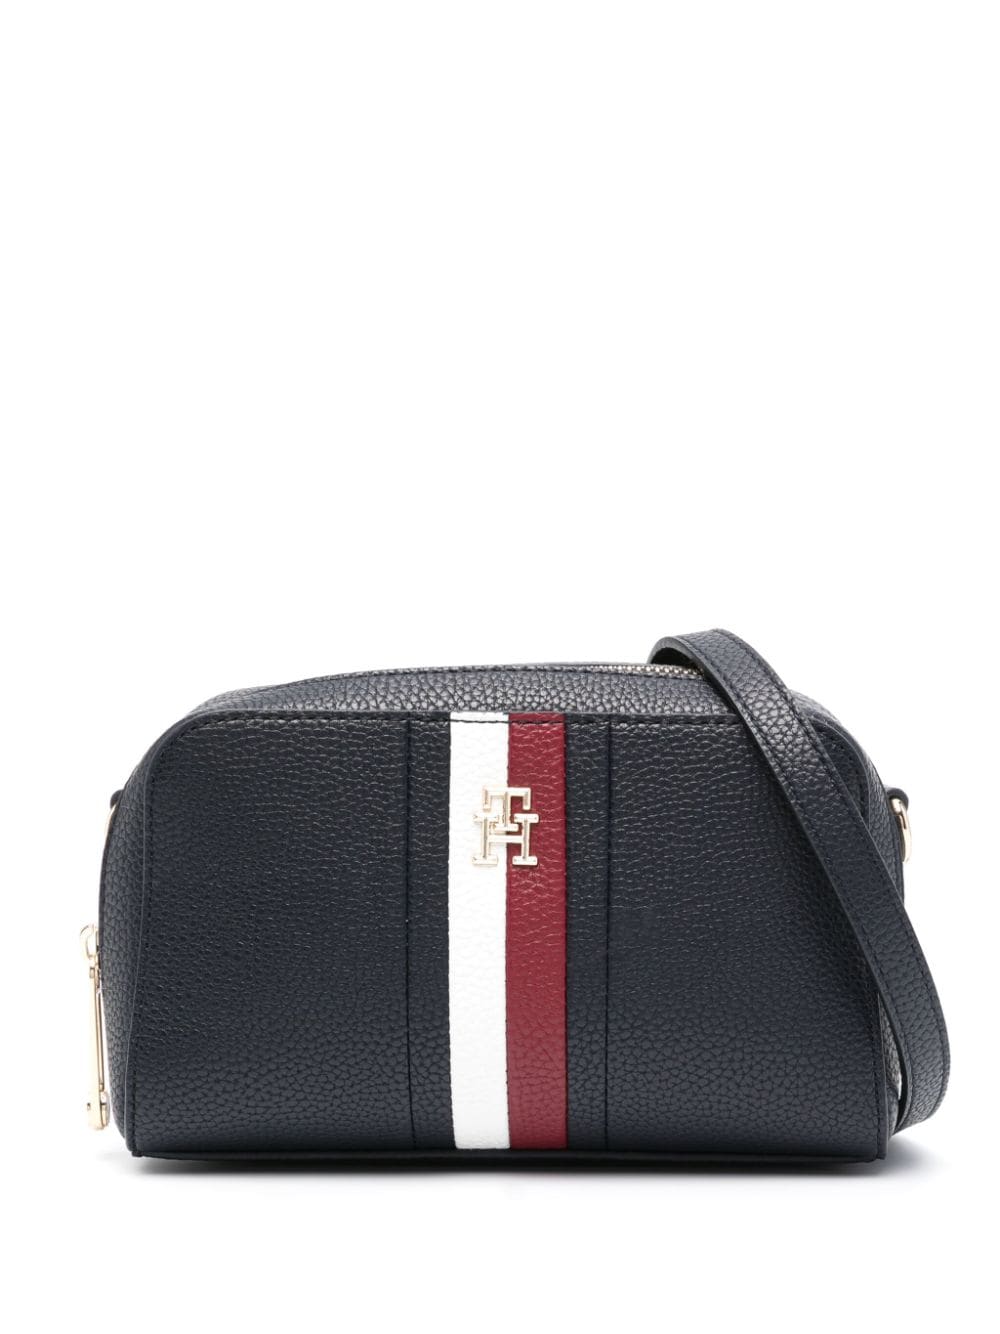 Tommy Hilfiger Luxe Chain-Link Leather Crossbody Bag